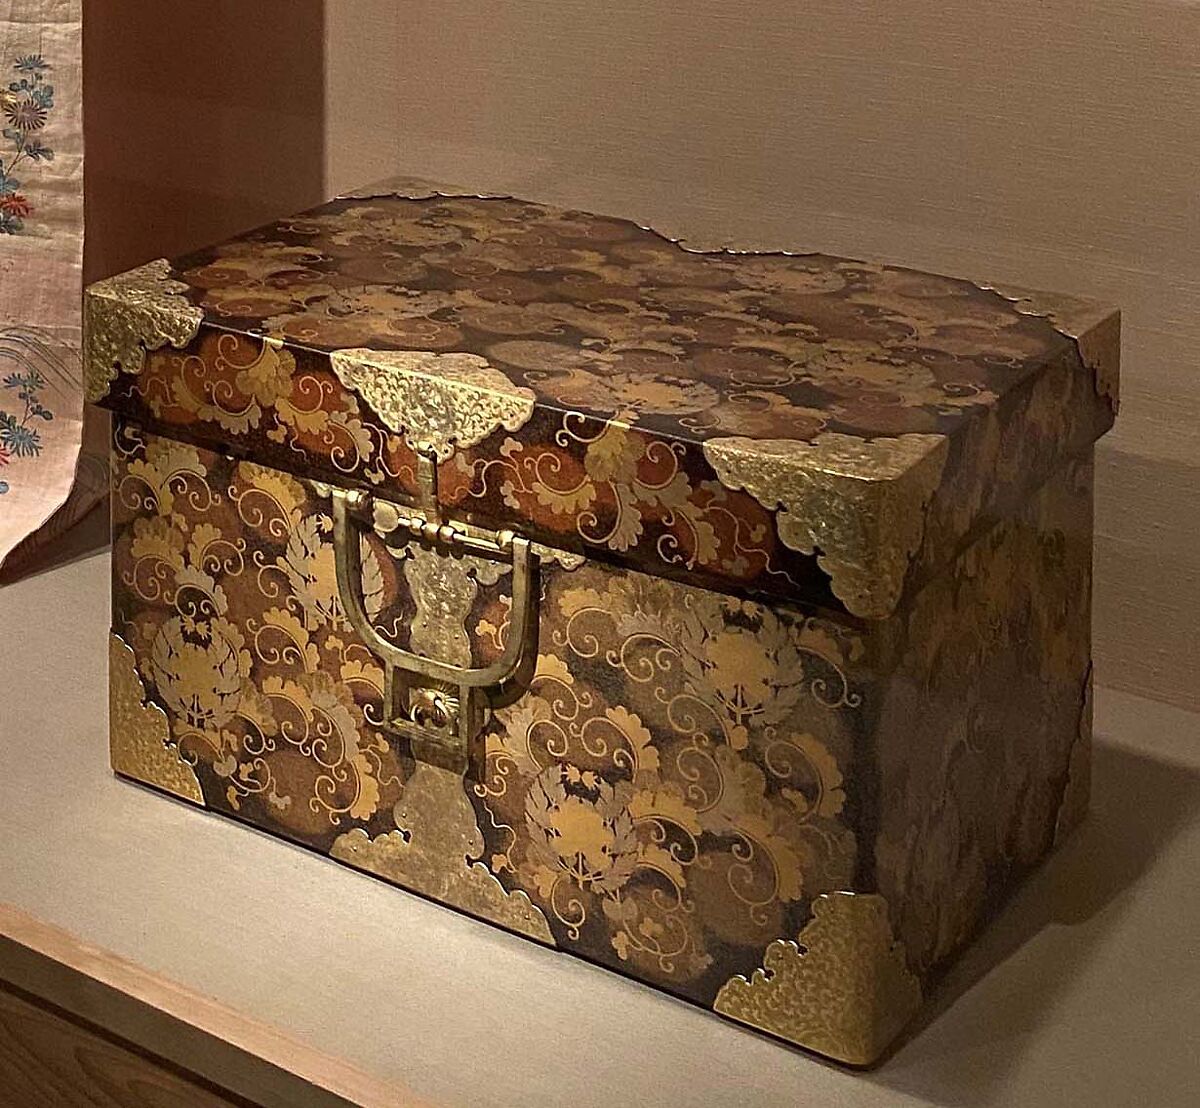 Storage Trunk (Nagamochi) with Family Crests, Pine, and Foliage Pattern, Lacquered wood with gold and silver takamaki‑e and hiramaki‑e on nashiji (“pear-skin” ground); gilded thread metal fittings, Japan 